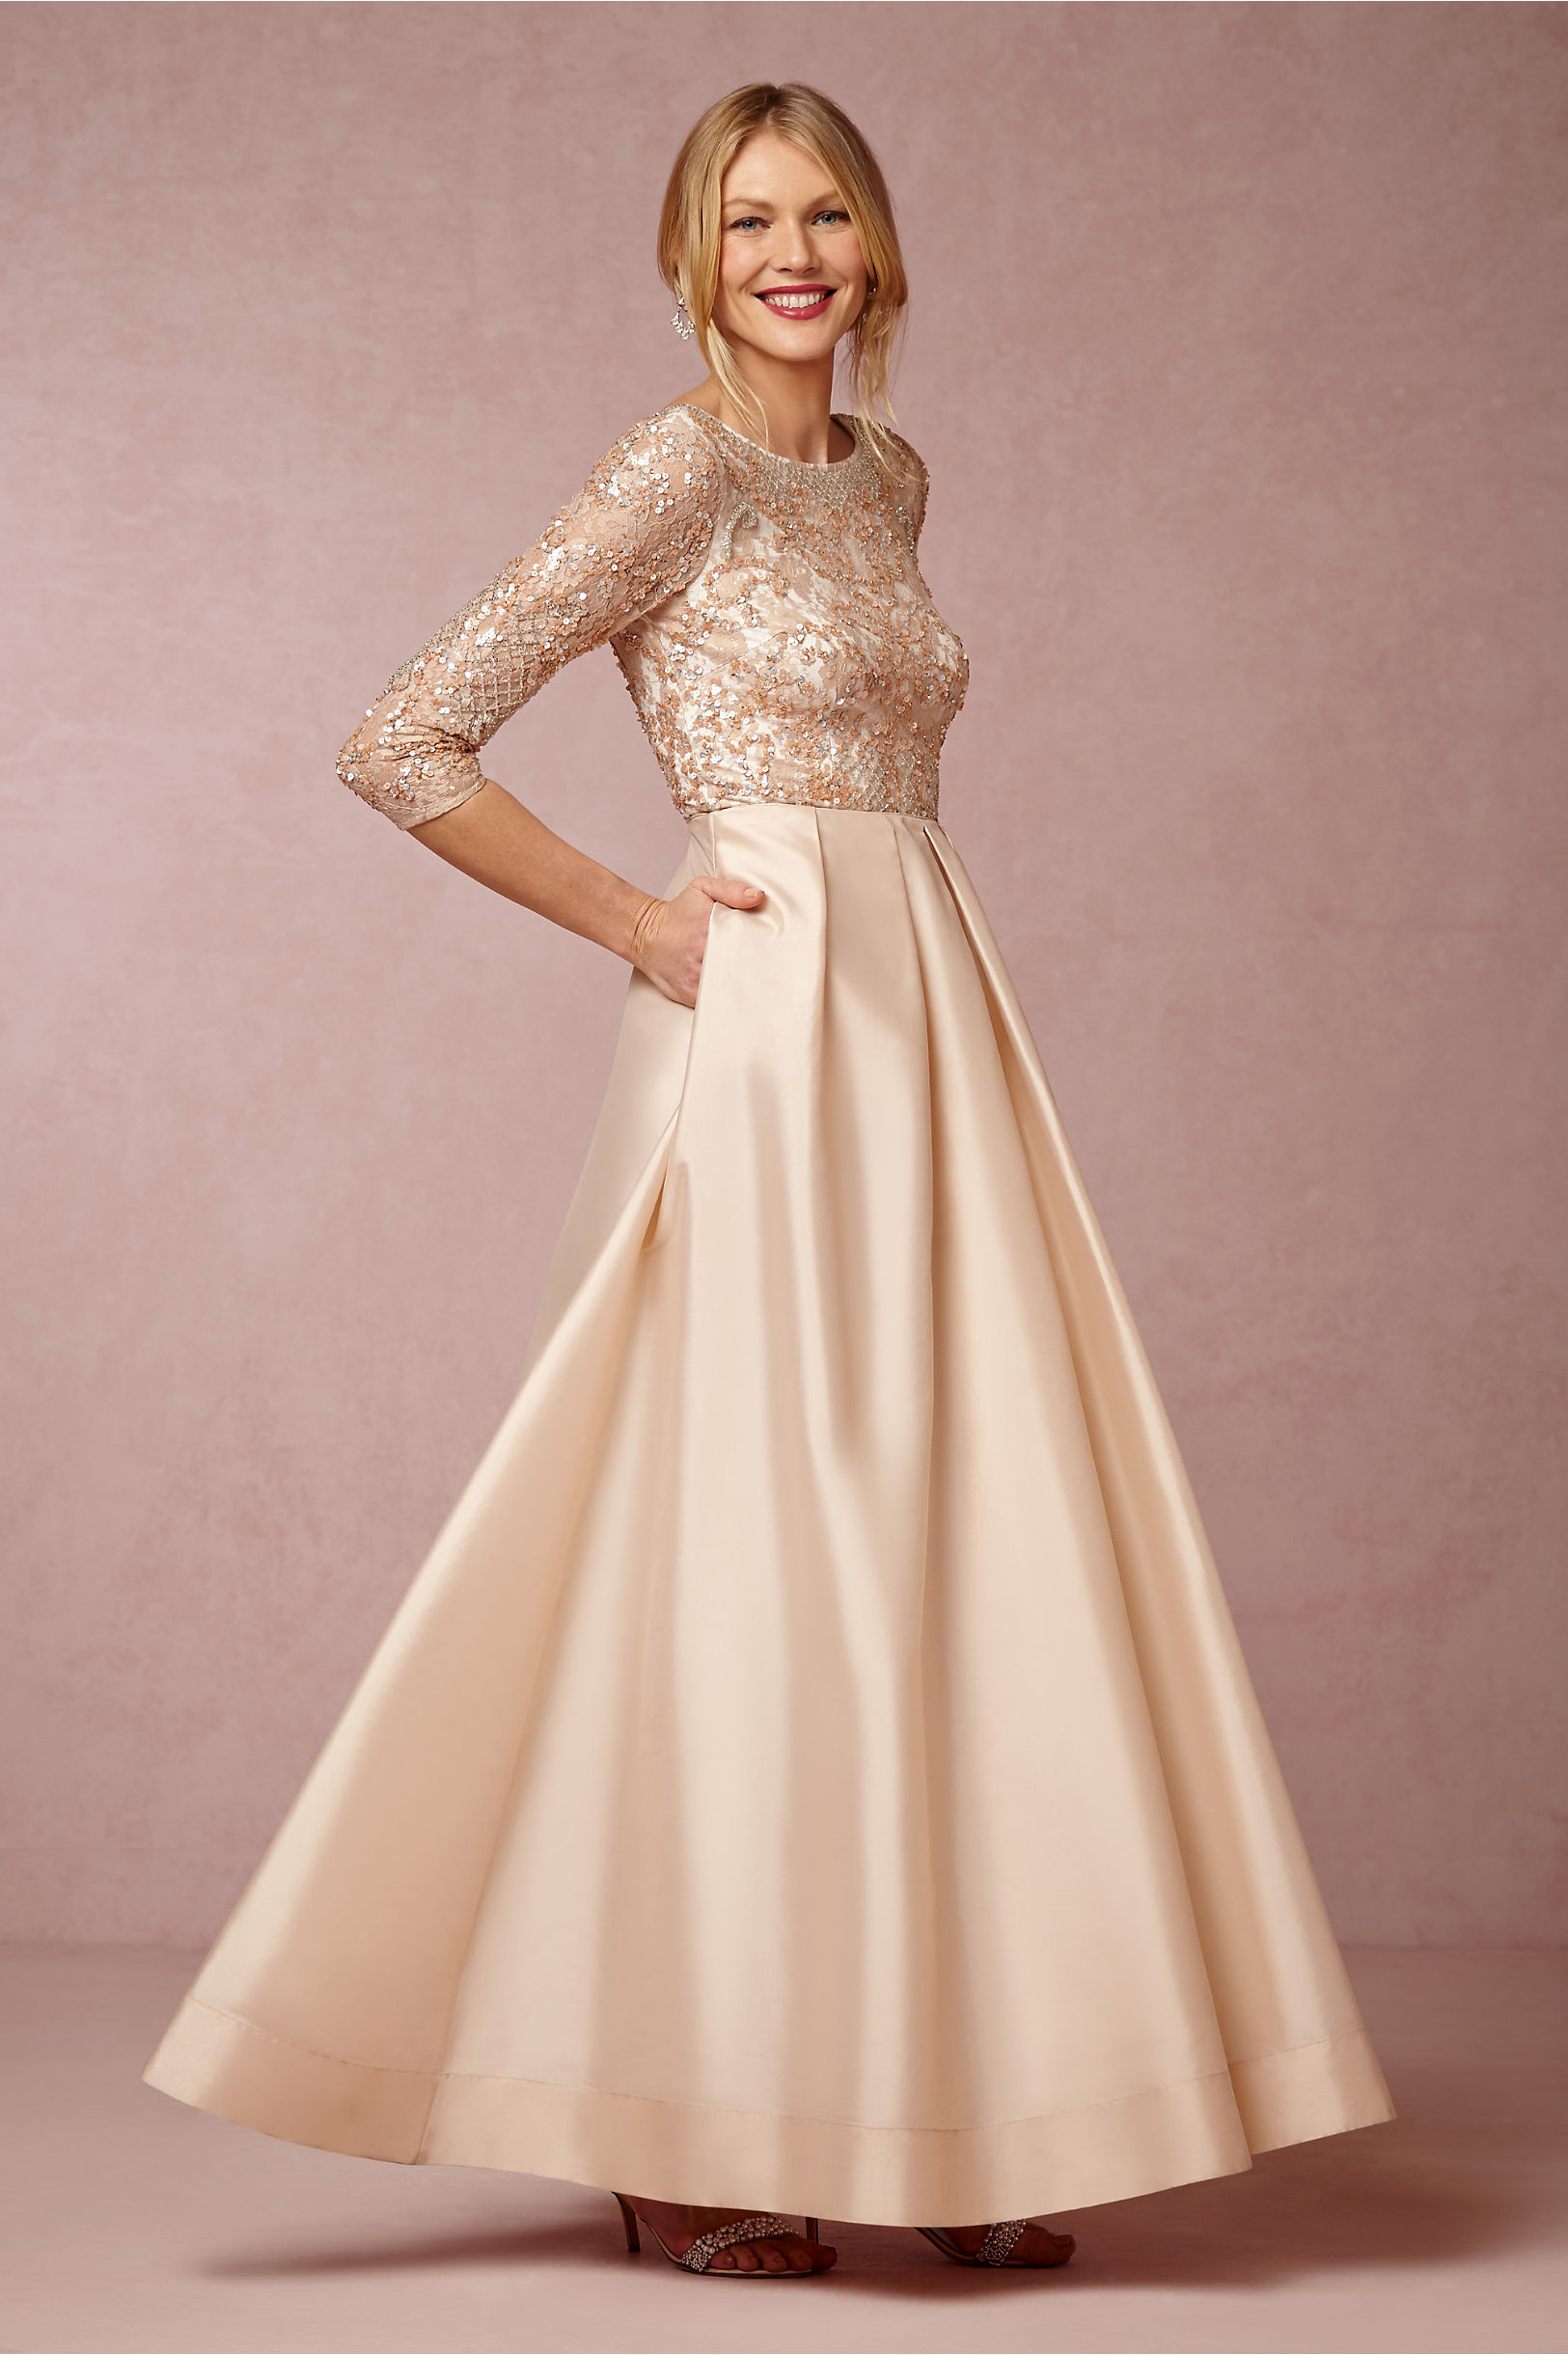 Mother of the Bride Dresses with Sleeves from BHLDN Dress for the Wedding